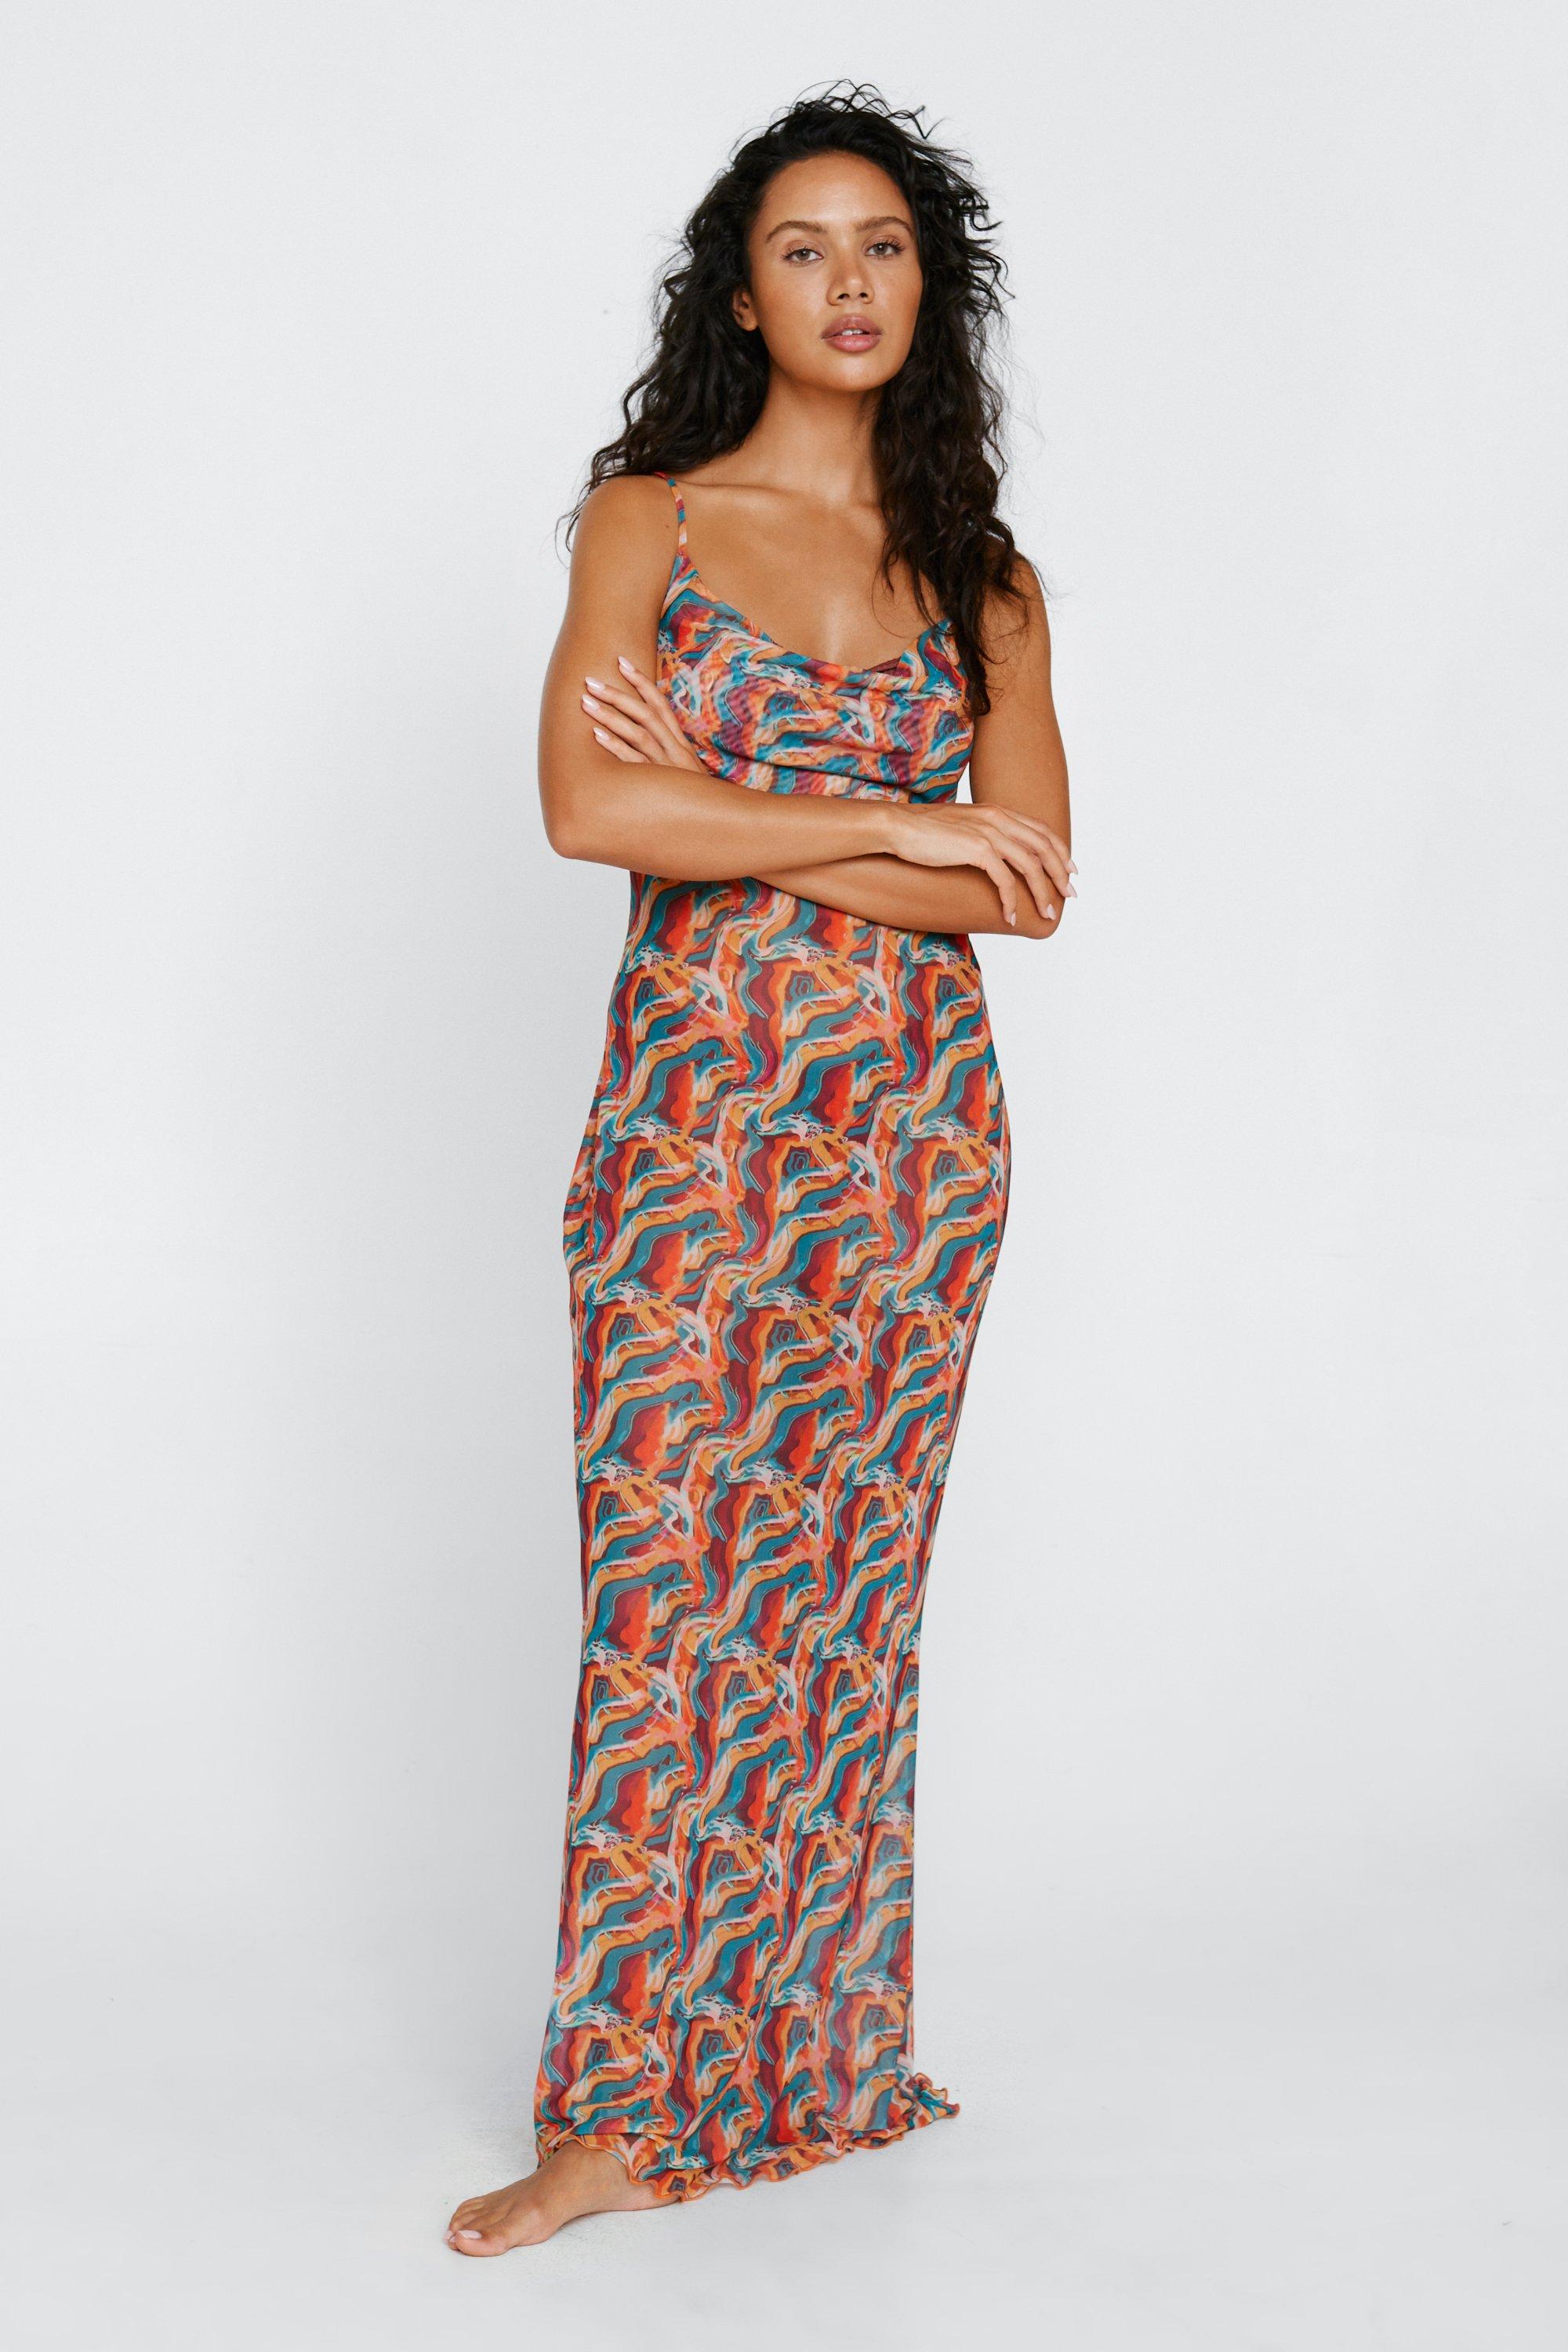 Marble Print Mesh Cover Up Maxi Dress ...